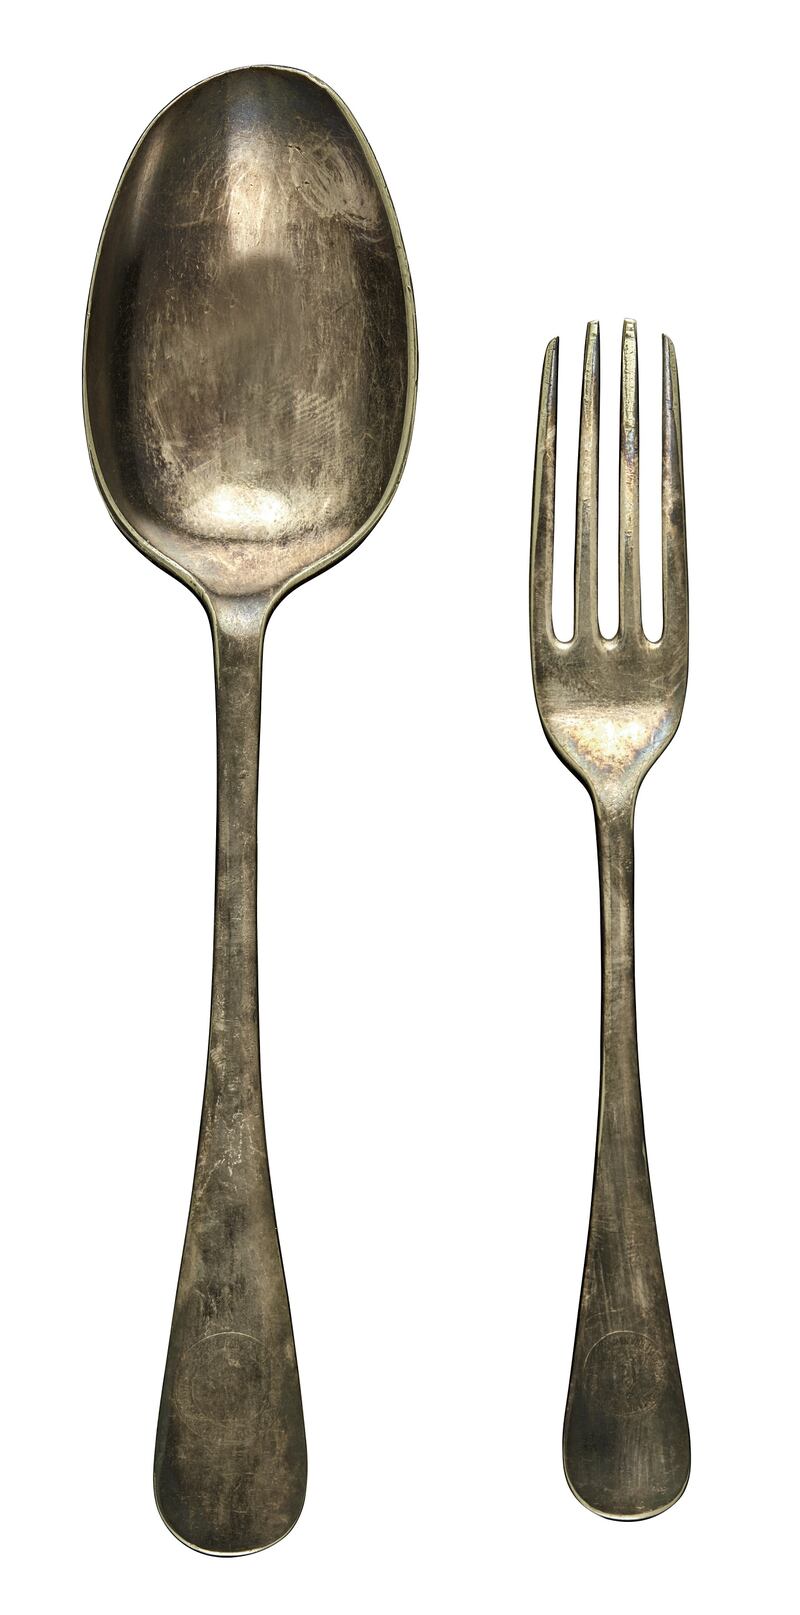 A spoon and fork from the expedition (Sotheby's)